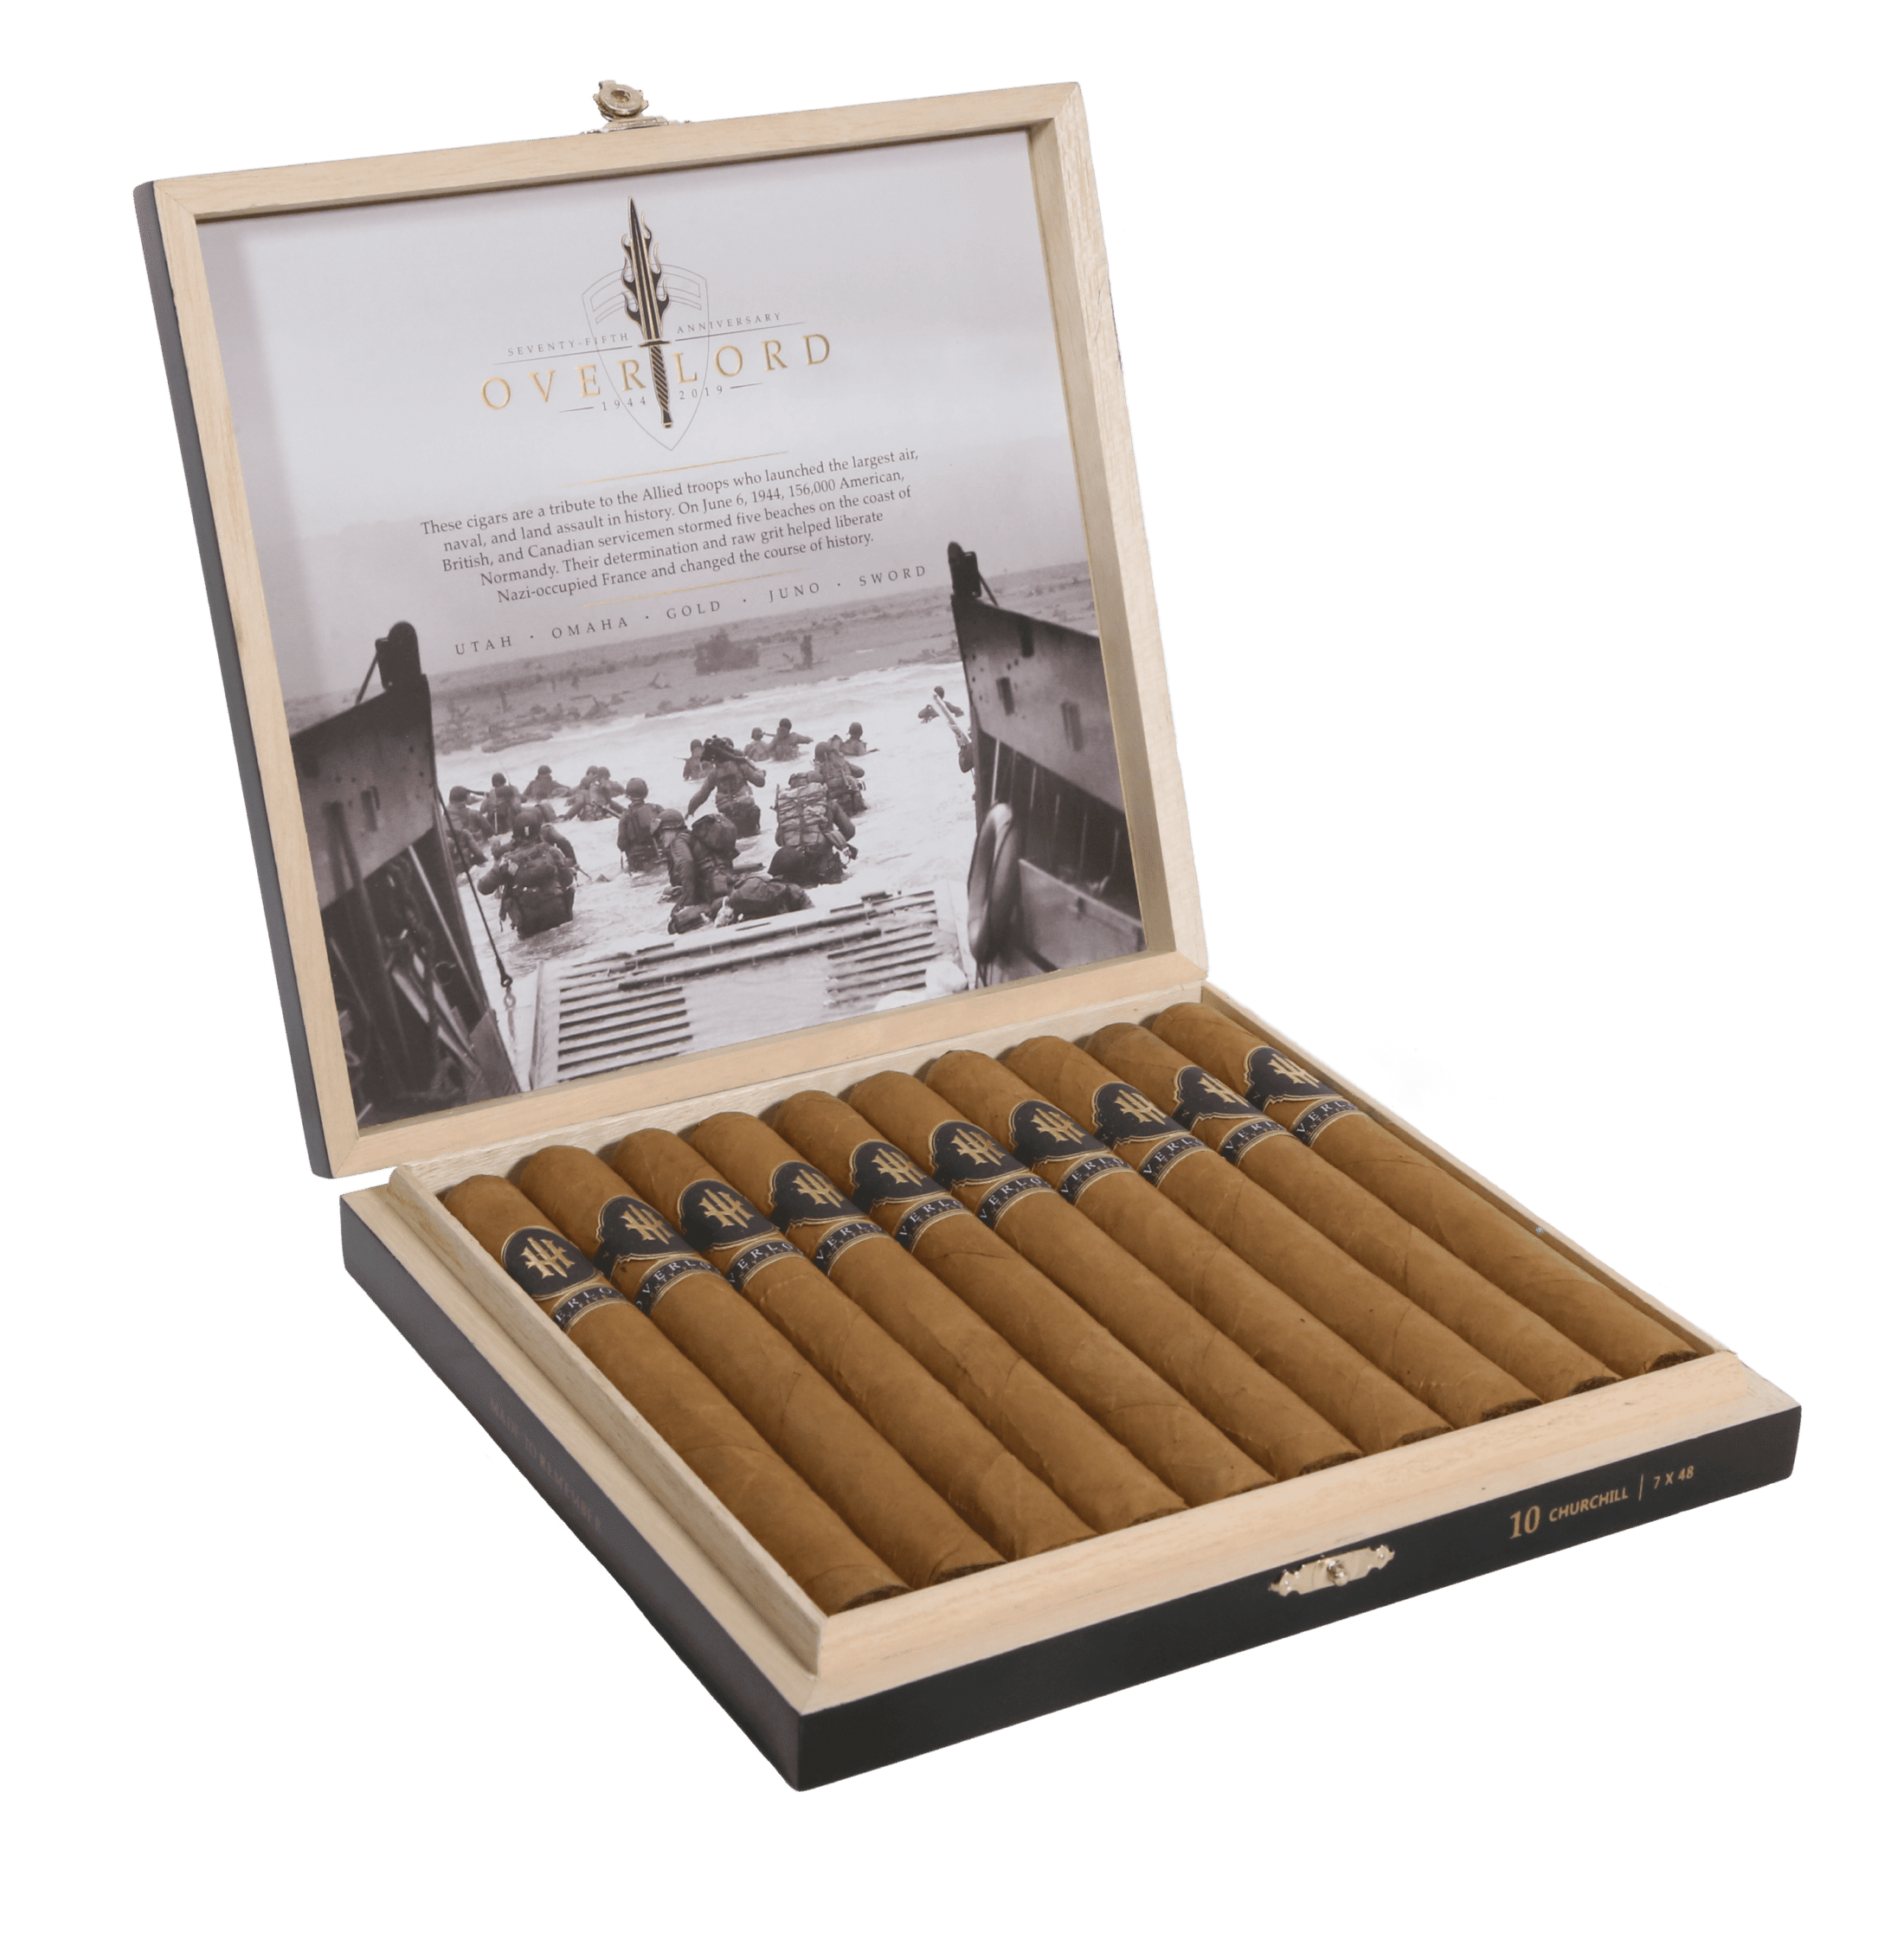 Open box of 10 count Hooten Young Overlord Churchill cigars